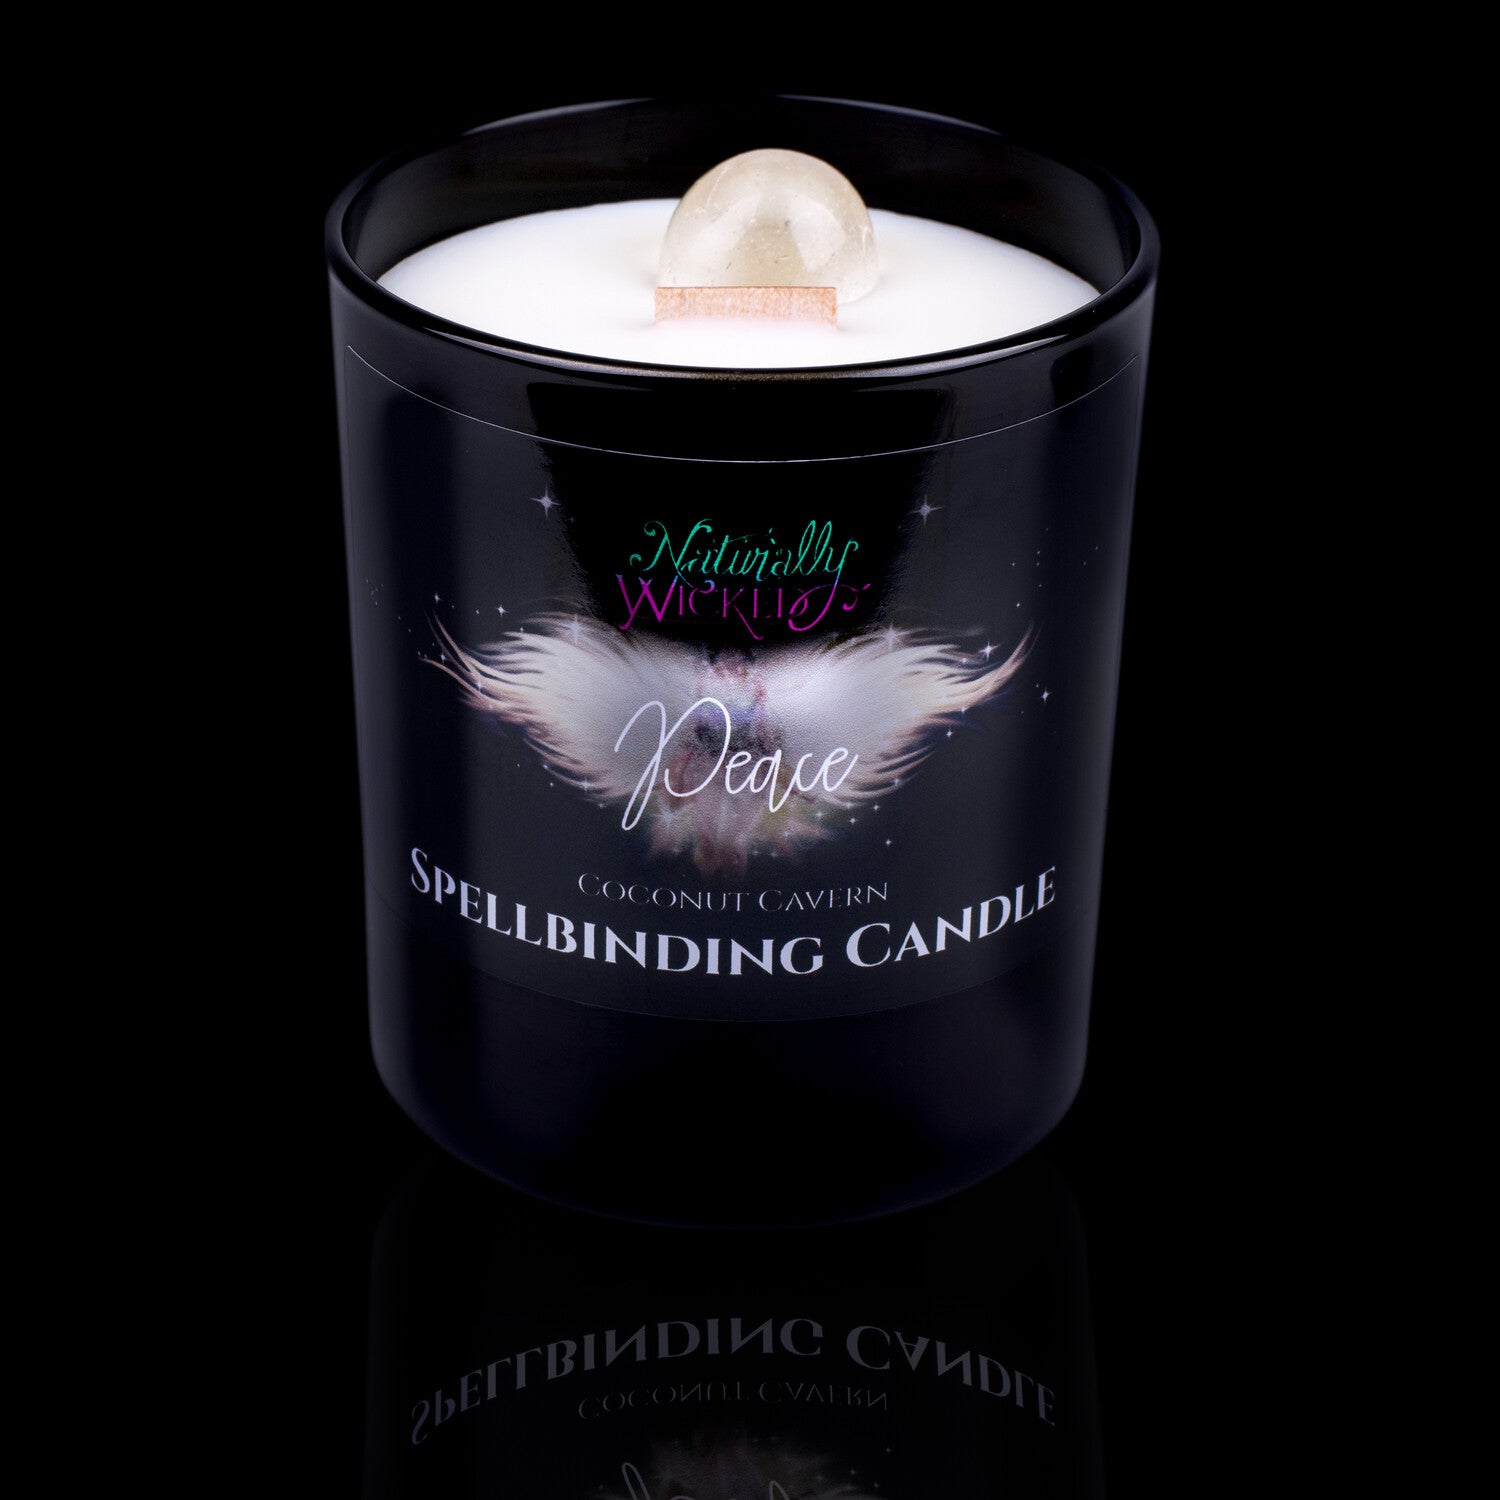 Give The Gift Of Peace With The Naturally Wicked Spellbinding Peace Crystal Candle Entombed In Pure White Plant-Based Wax With Crackling Wood Wick & Clear Quartz Crystal